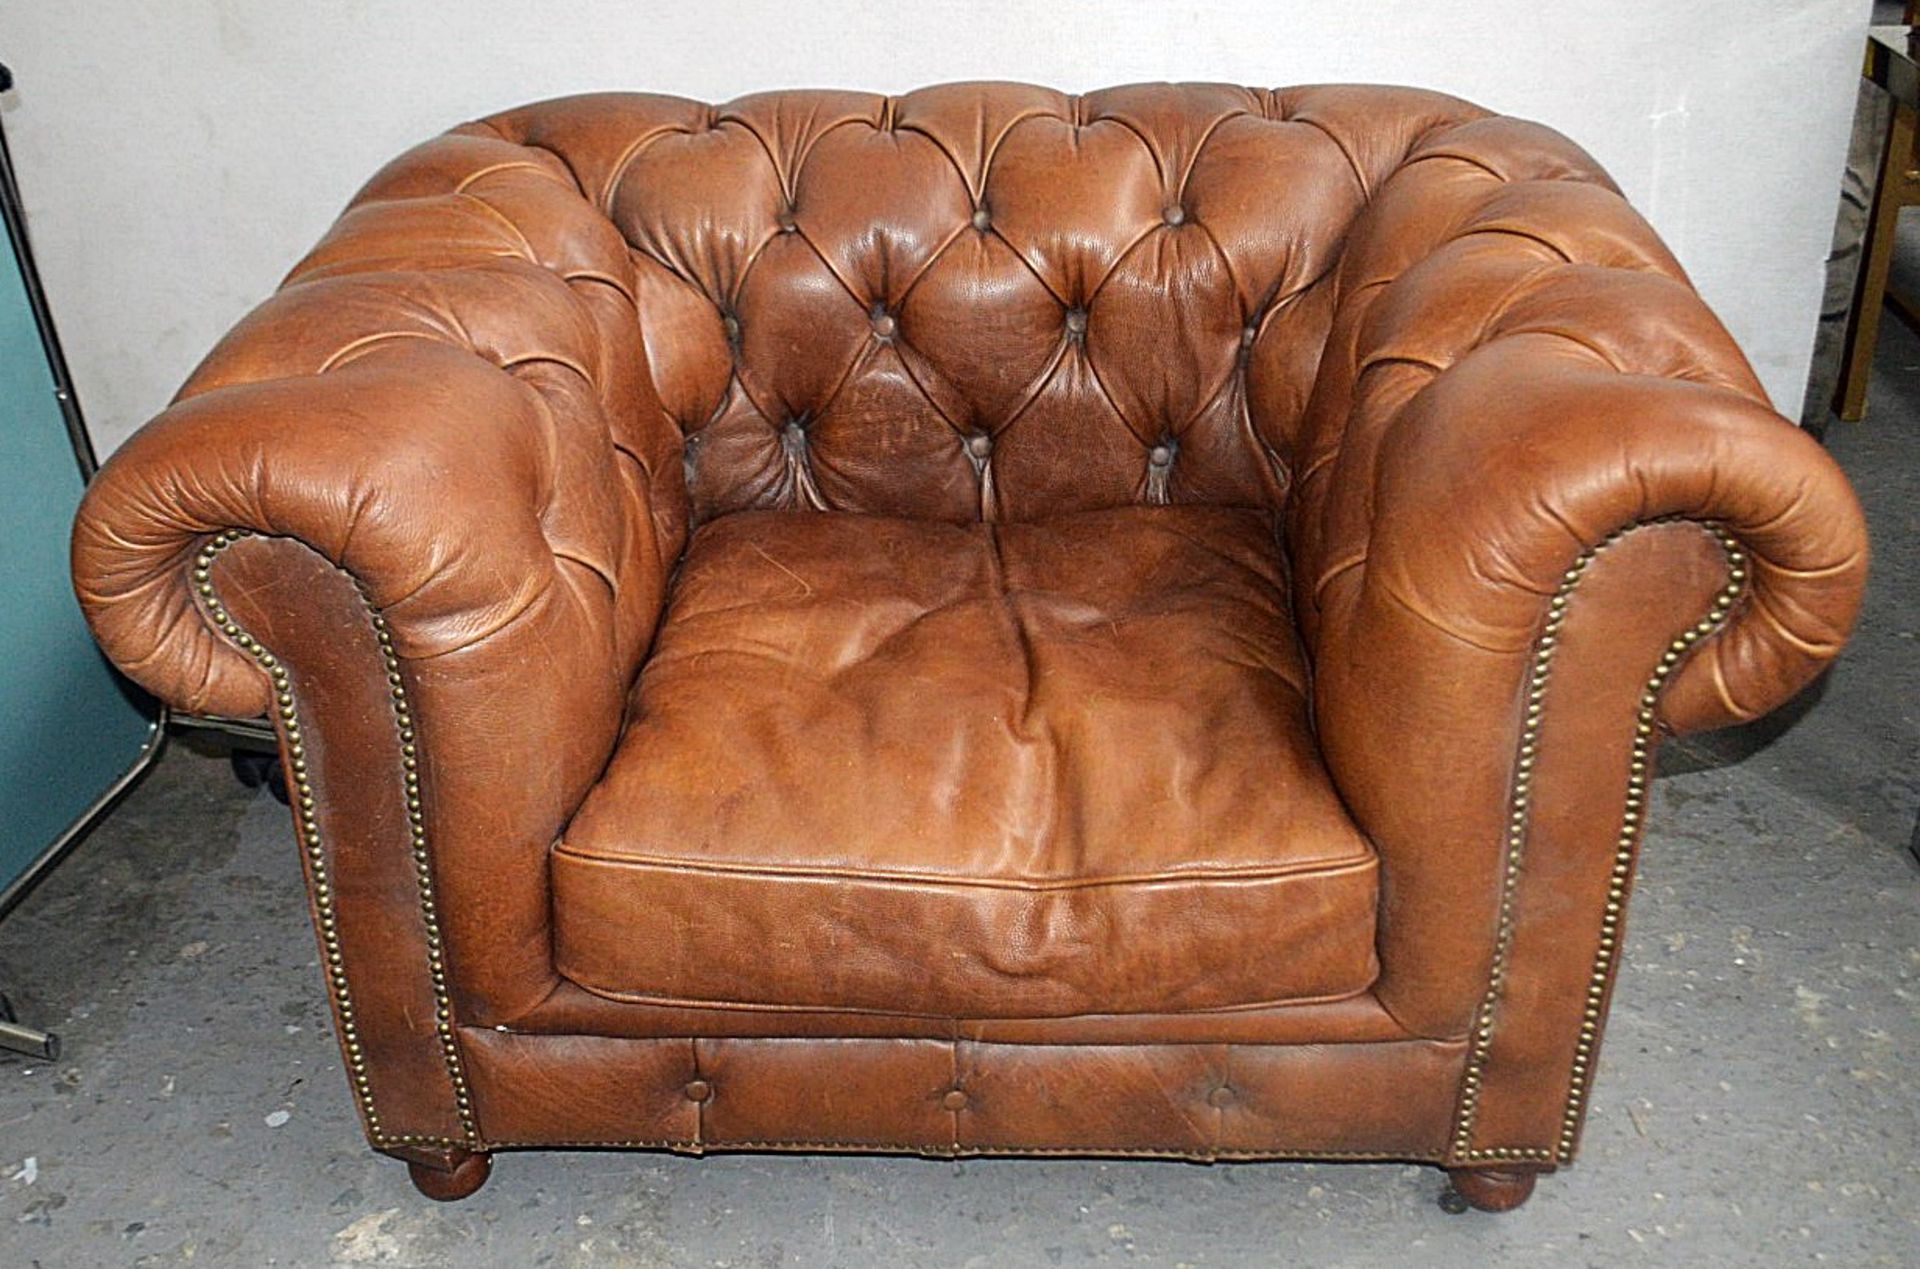 1 x Vintage-style Large Leather Chesterfield Armchair Featuring A Distressed Finish - Image 2 of 6